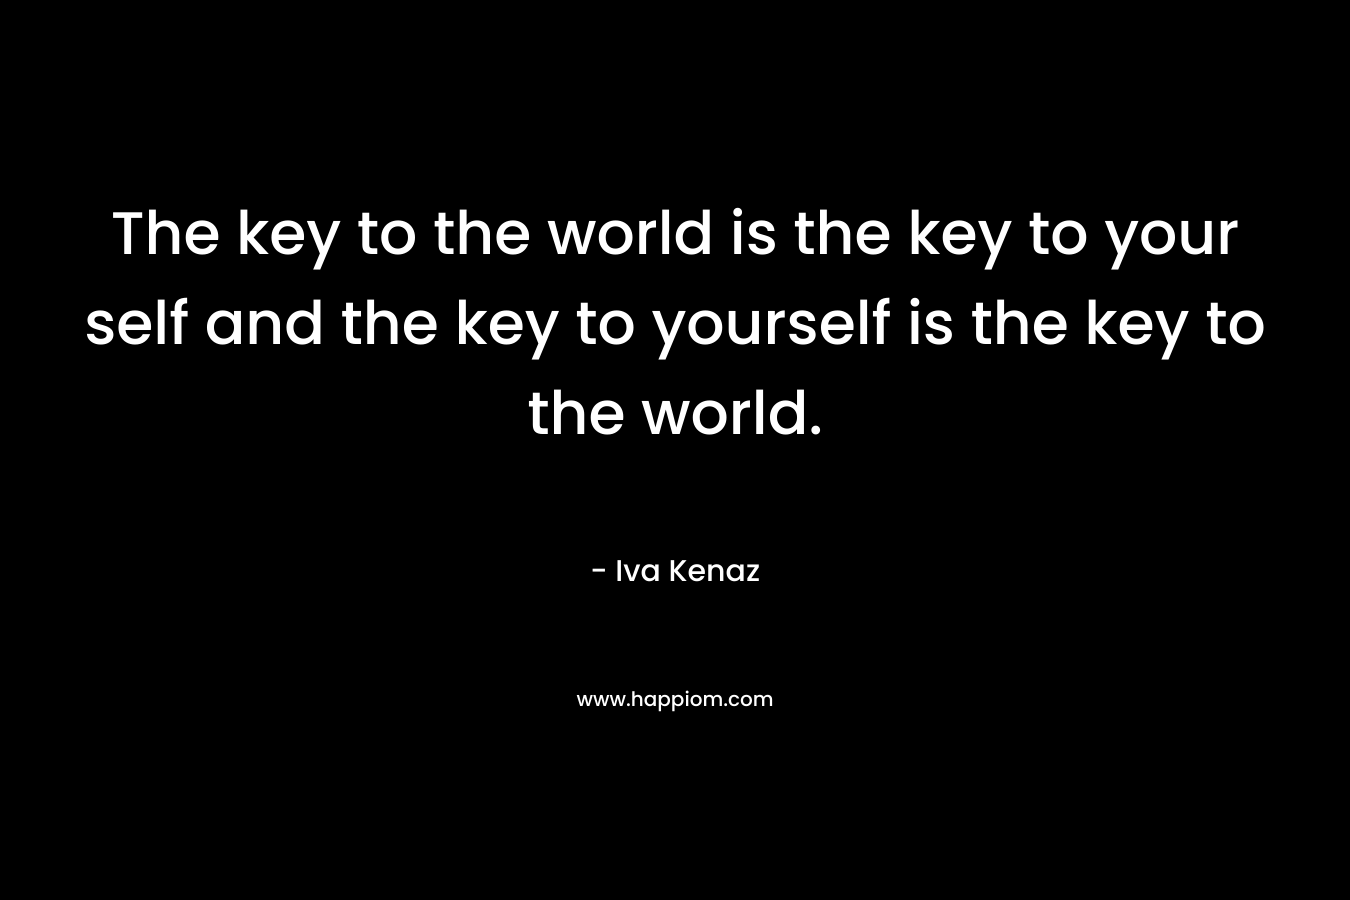 The key to the world is the key to your self and the key to yourself is the key to the world.